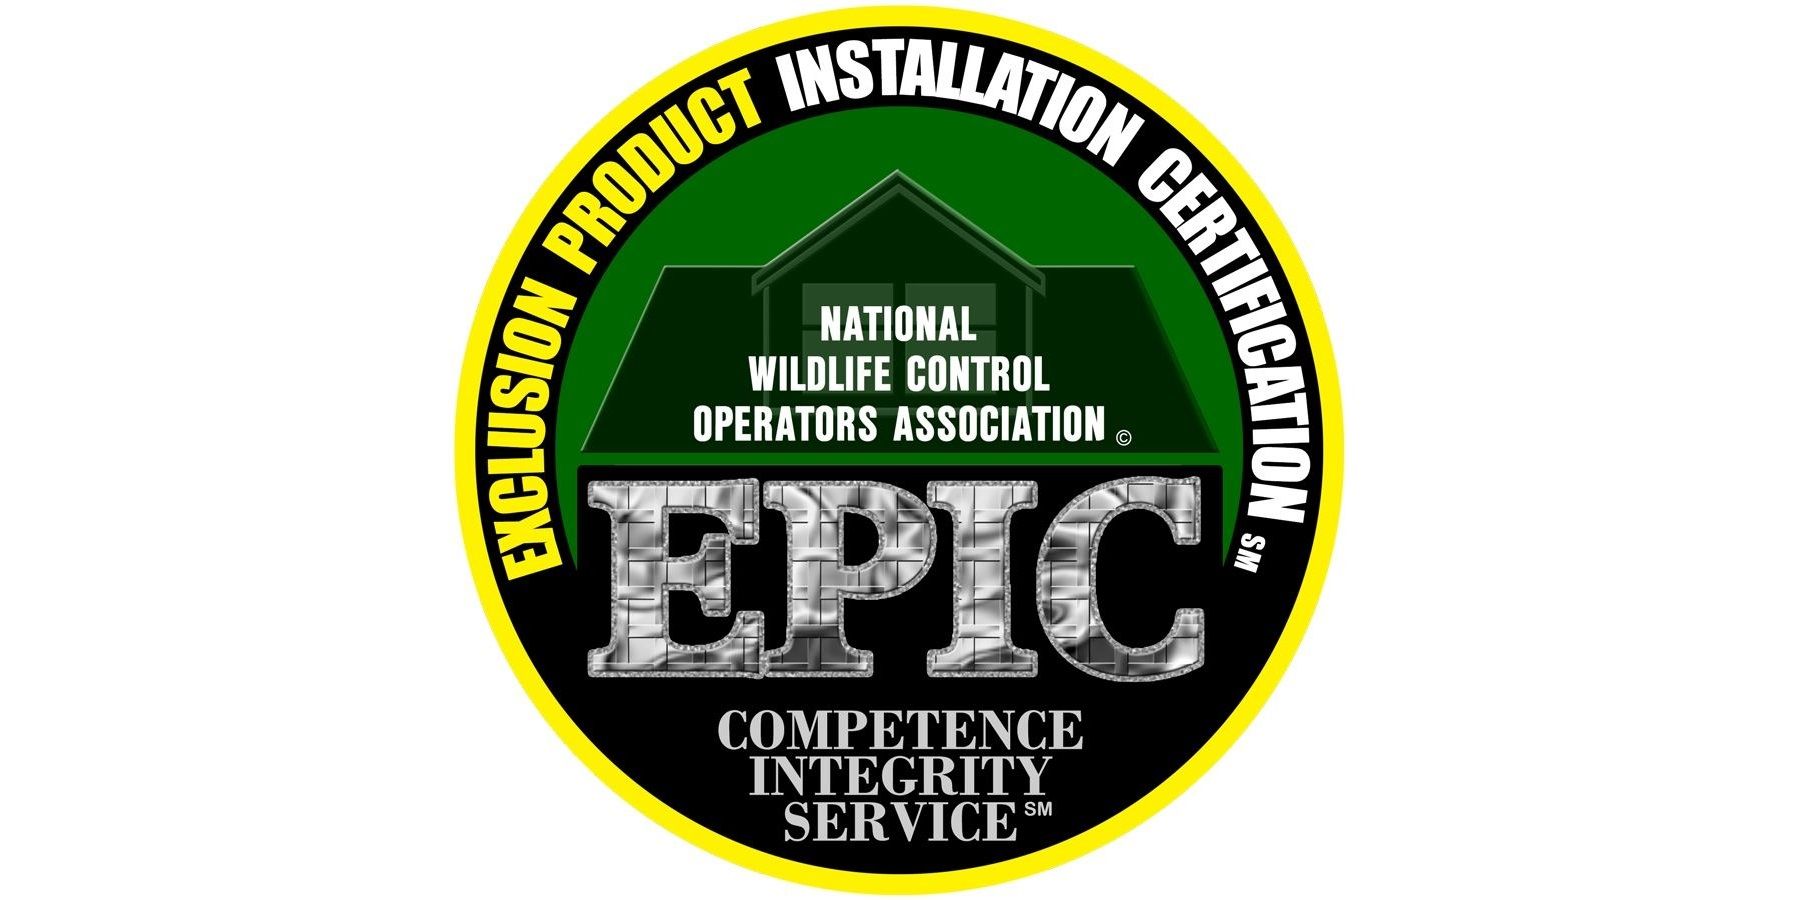 The logo for the National Wildlife Control Operators Association's Exclusion Product Installation Certification course against a white background.